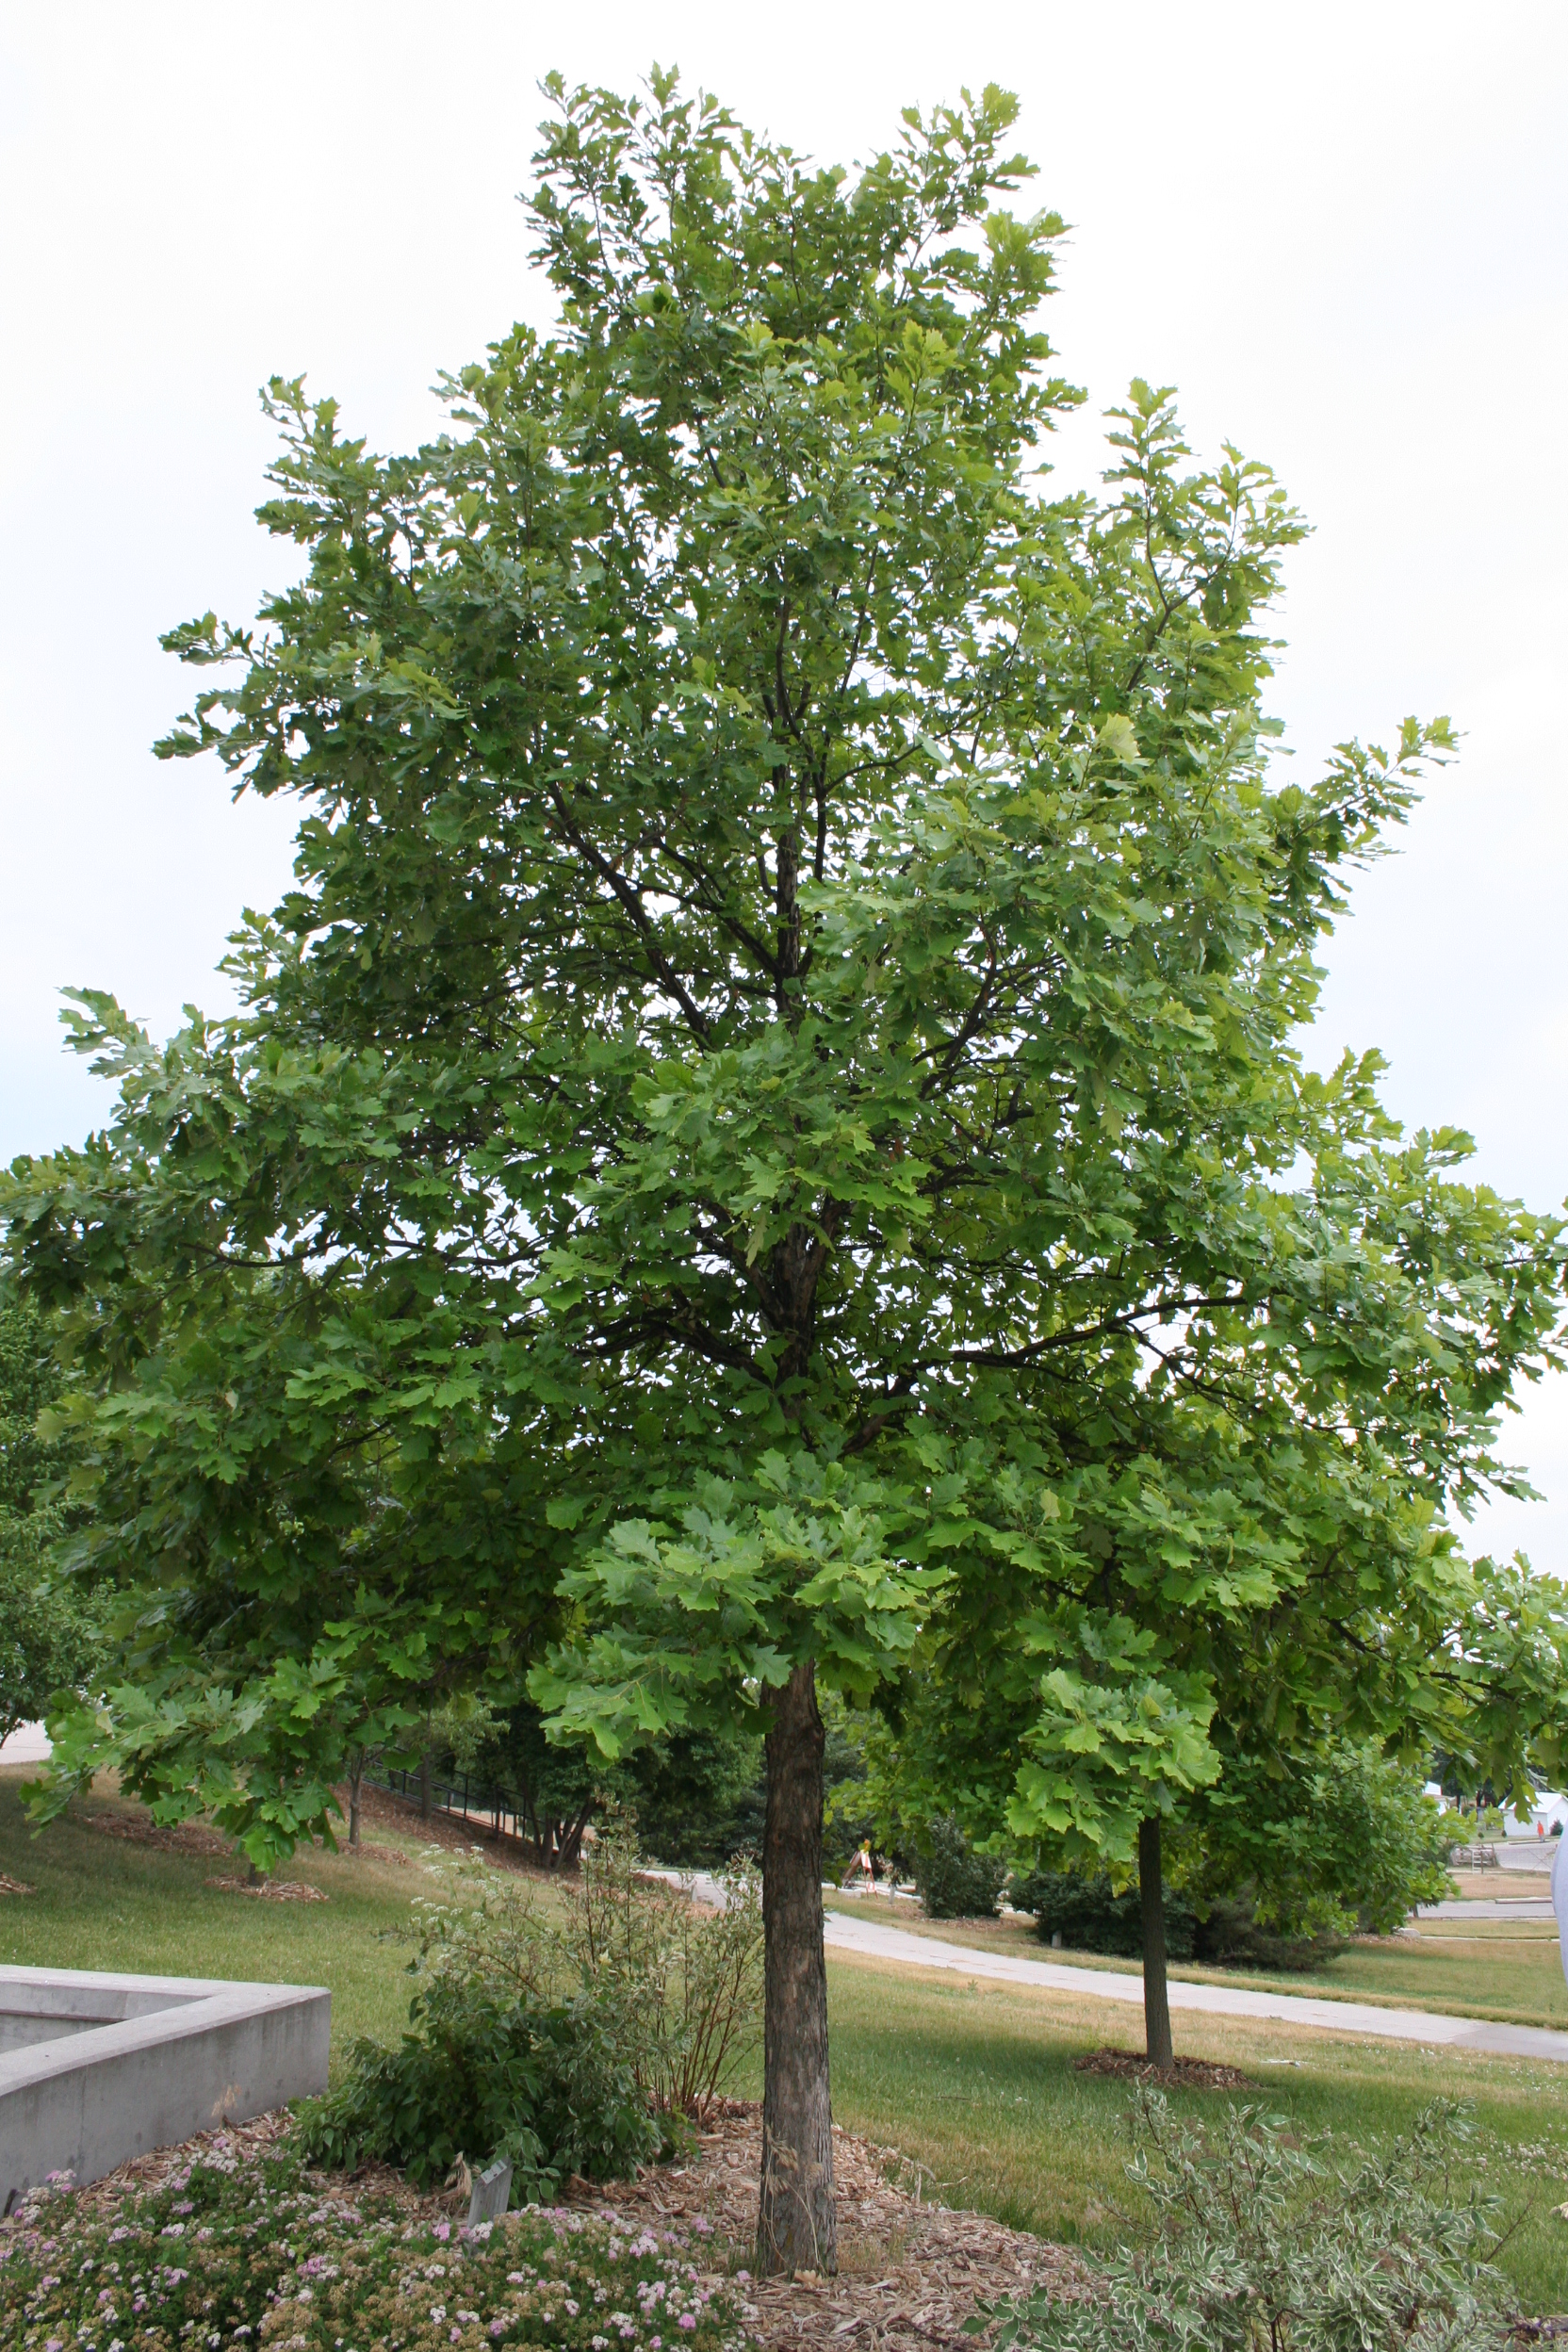 Plant an Oak Tree in Backyard, Pros And Cons 